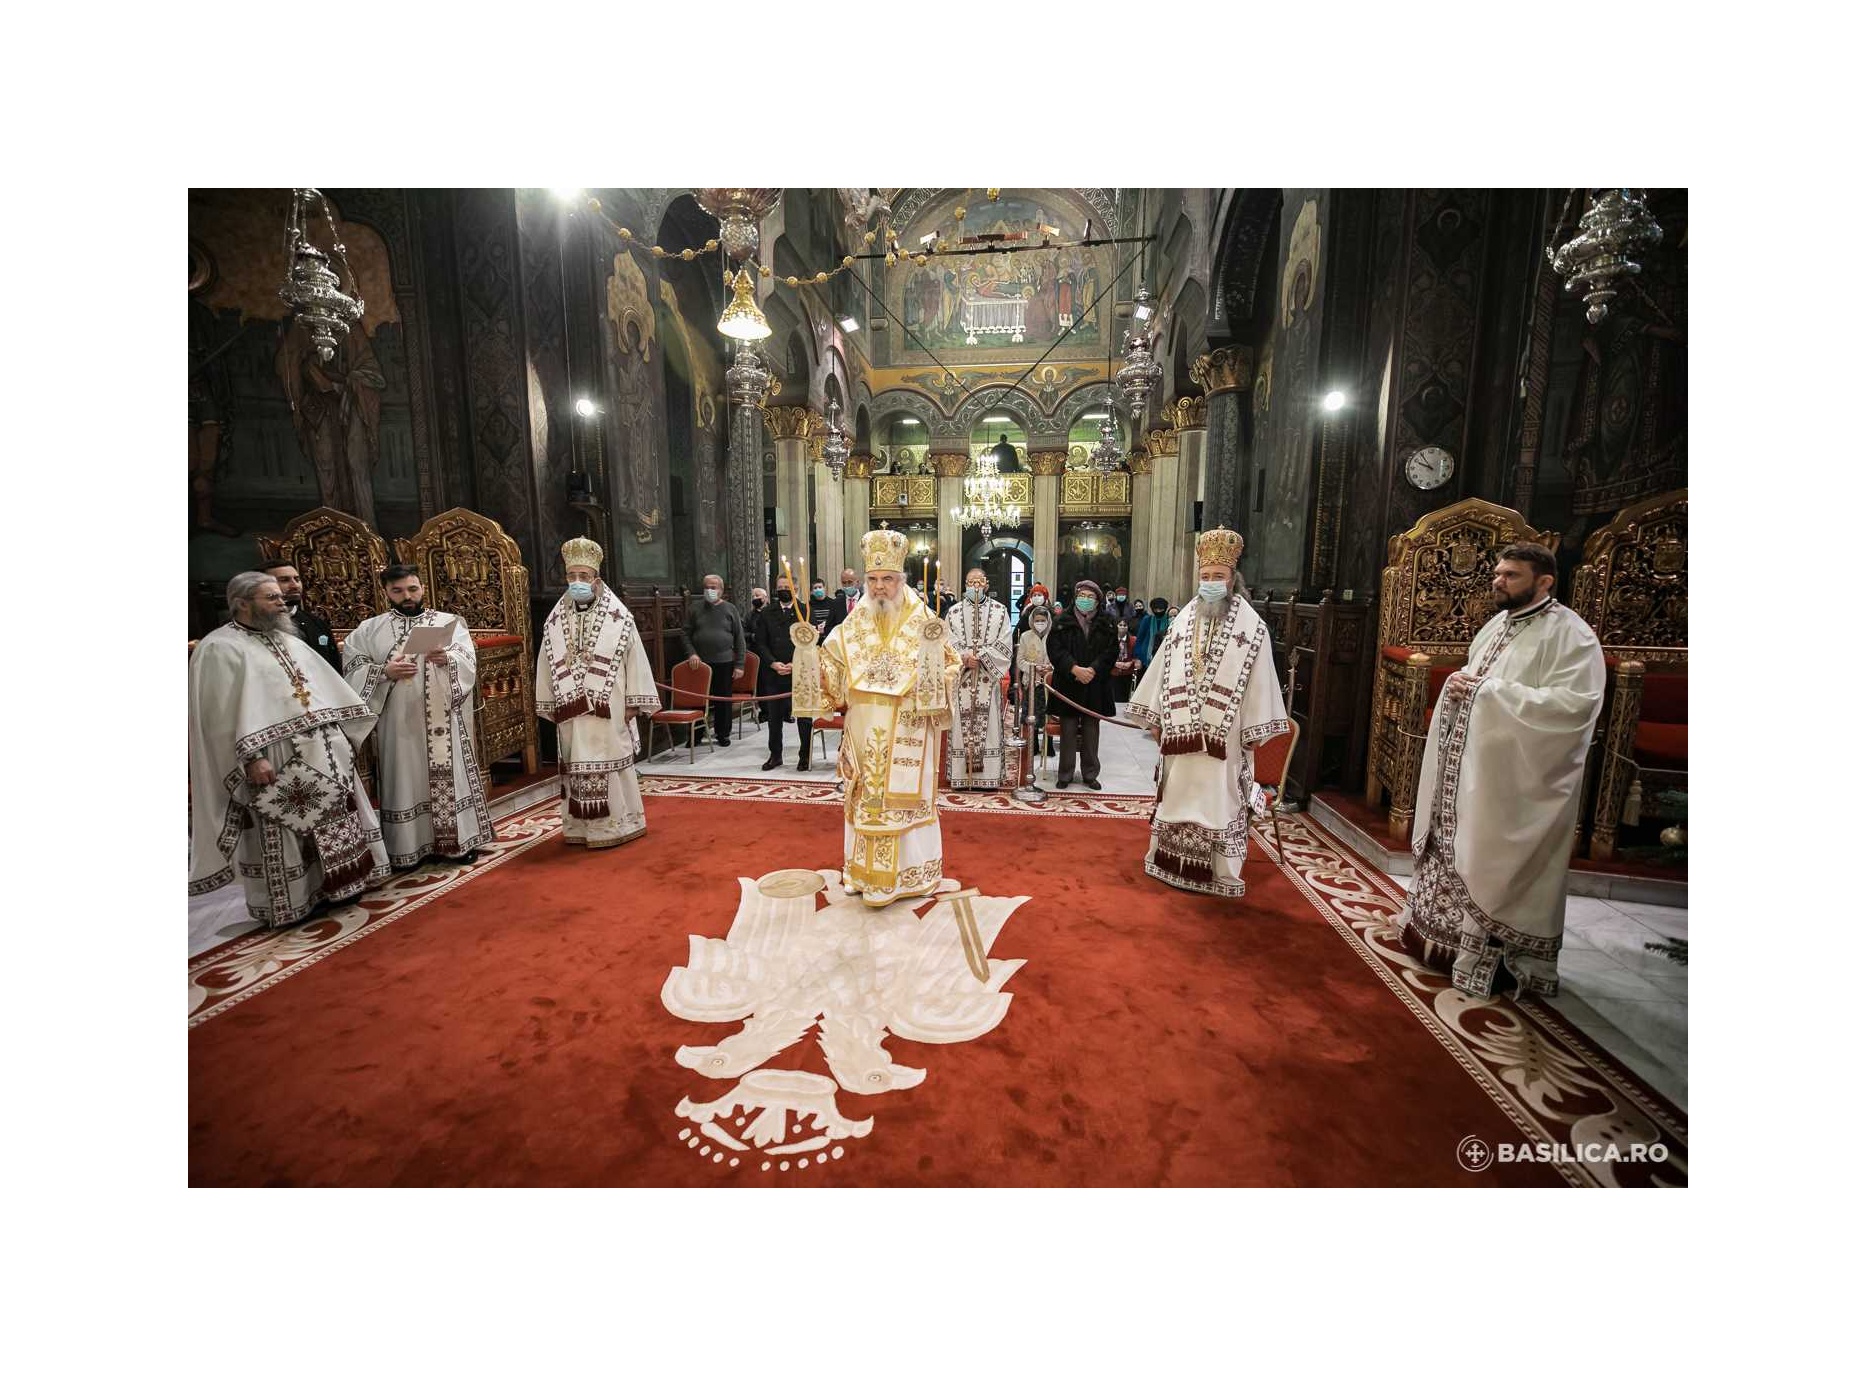 Patriarch Daniel of Romanian Orthodox Church presided over the Divine Liturgy of Christmas at Patriarchal Cathedral, Bucharest, Romania